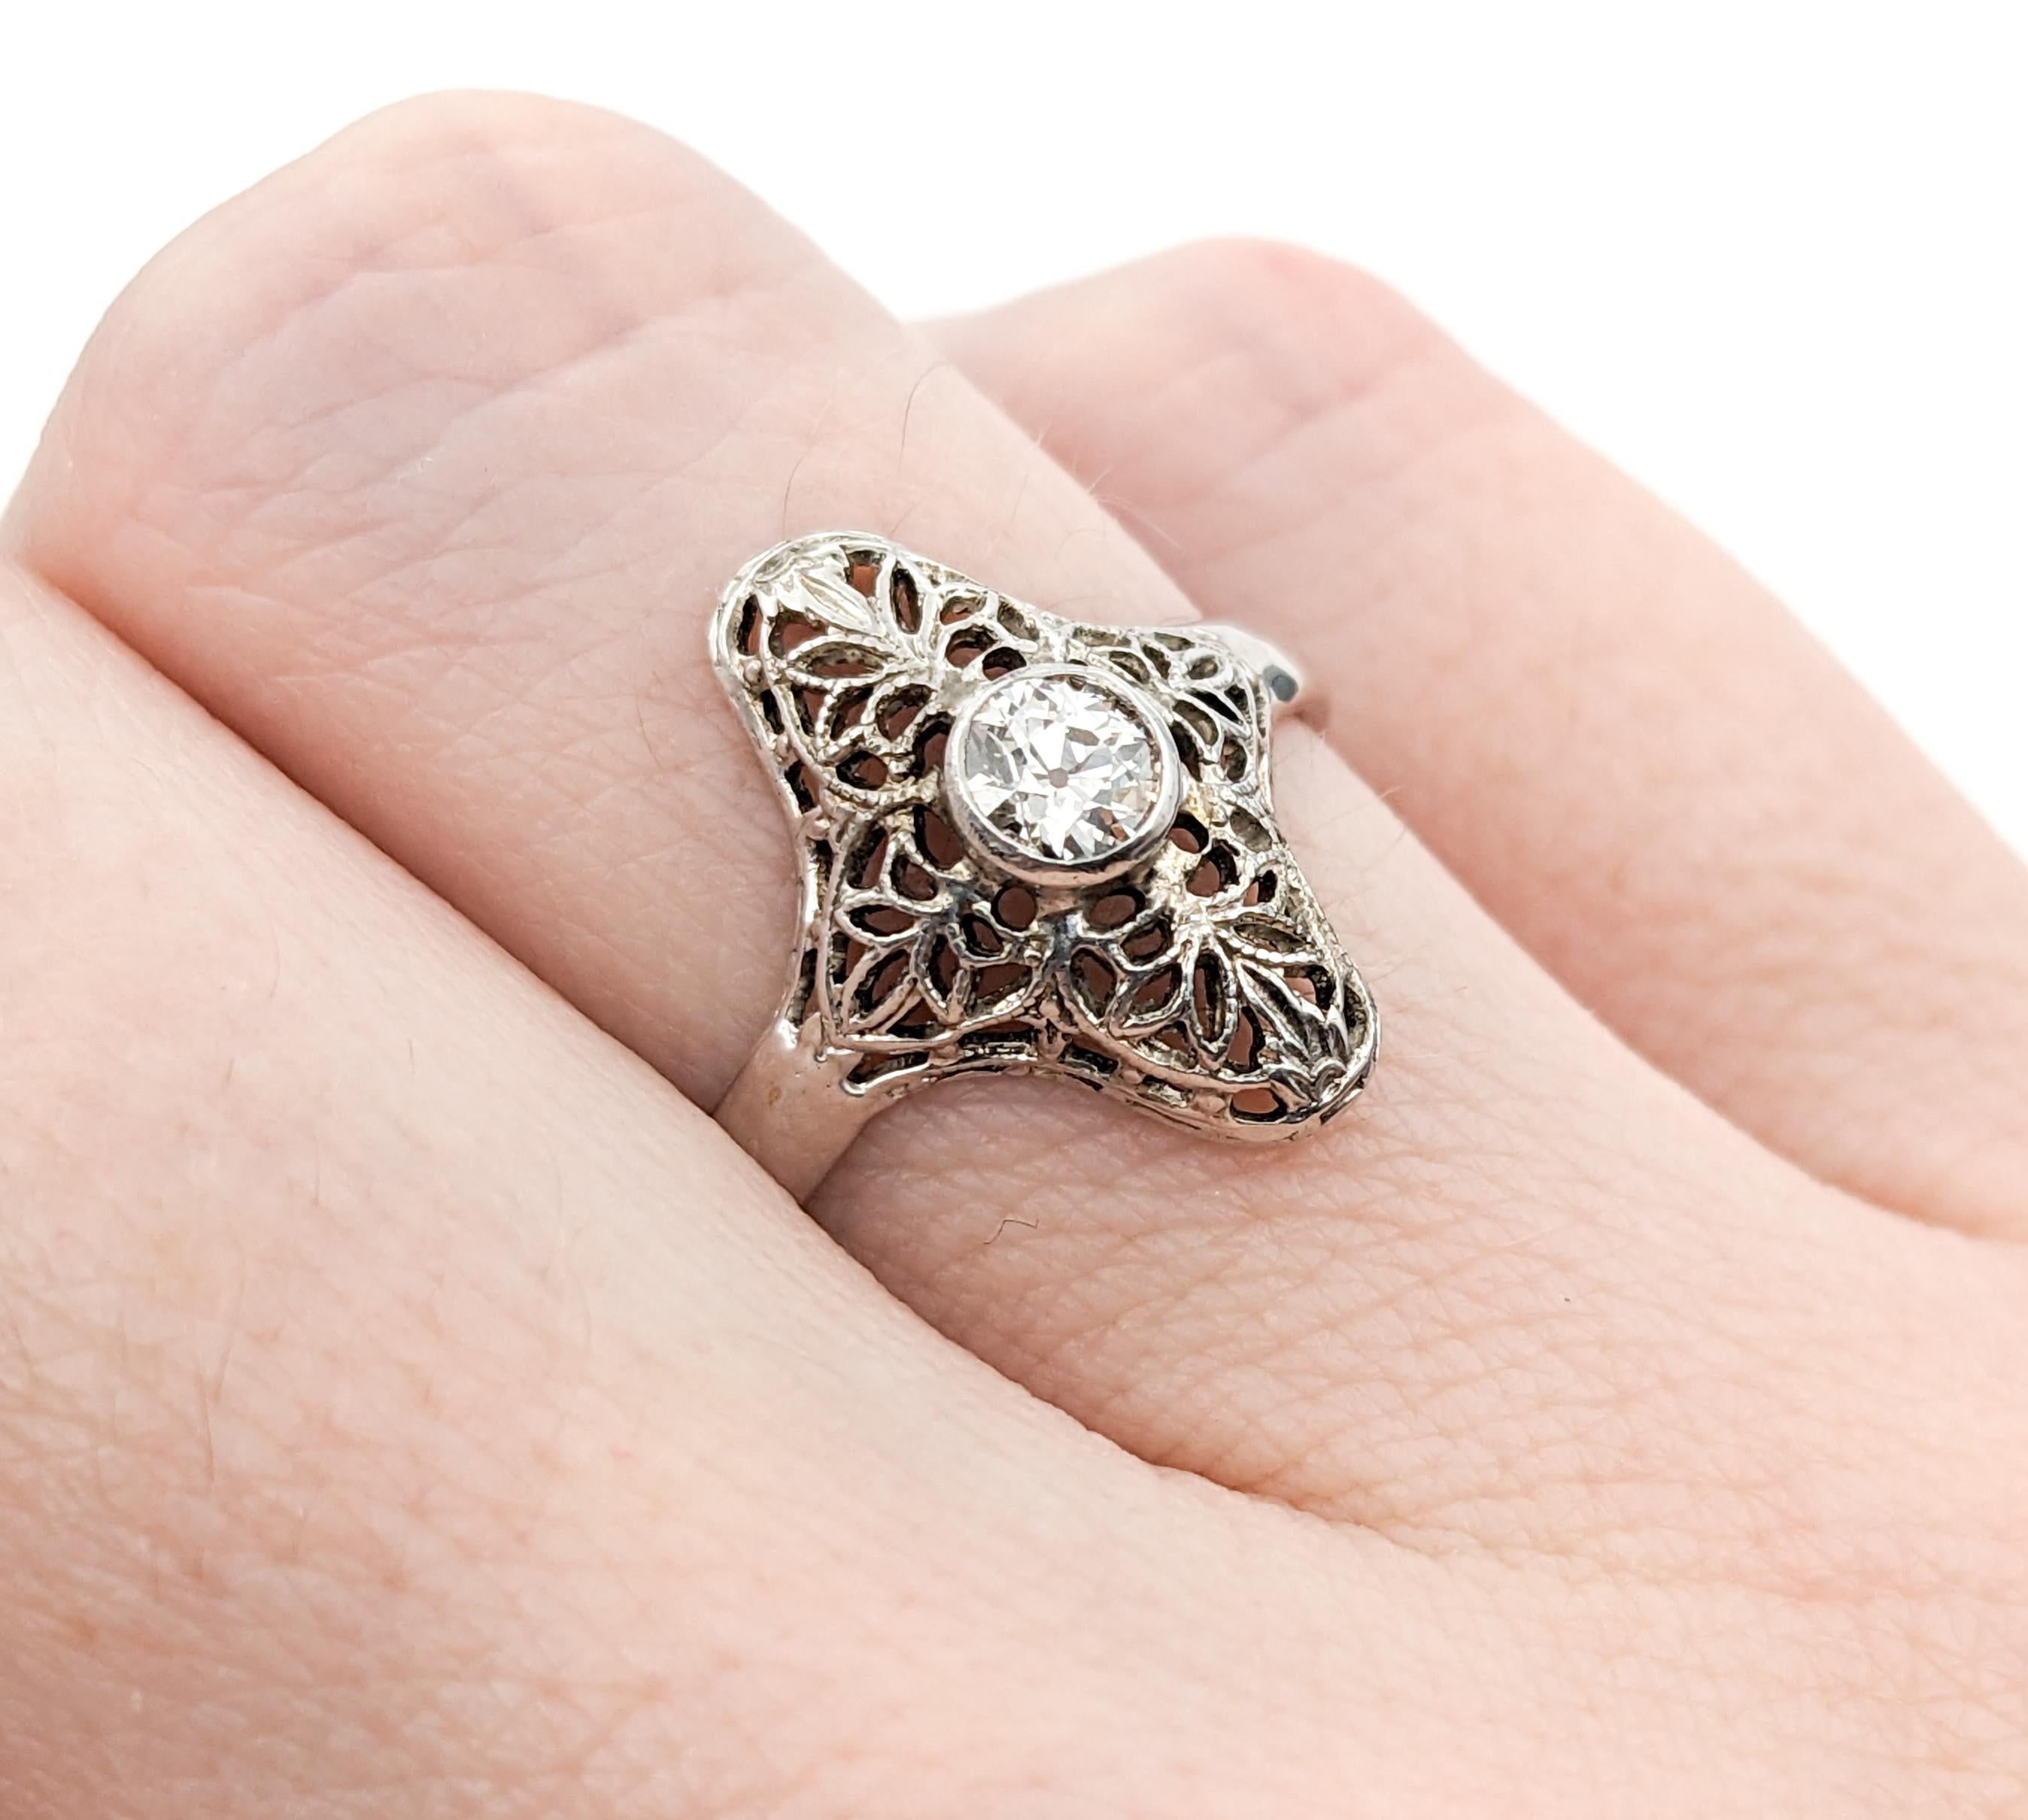 Antique Filigree Diamond Ring Art Deco Style Ring In White Gold For Sale 4